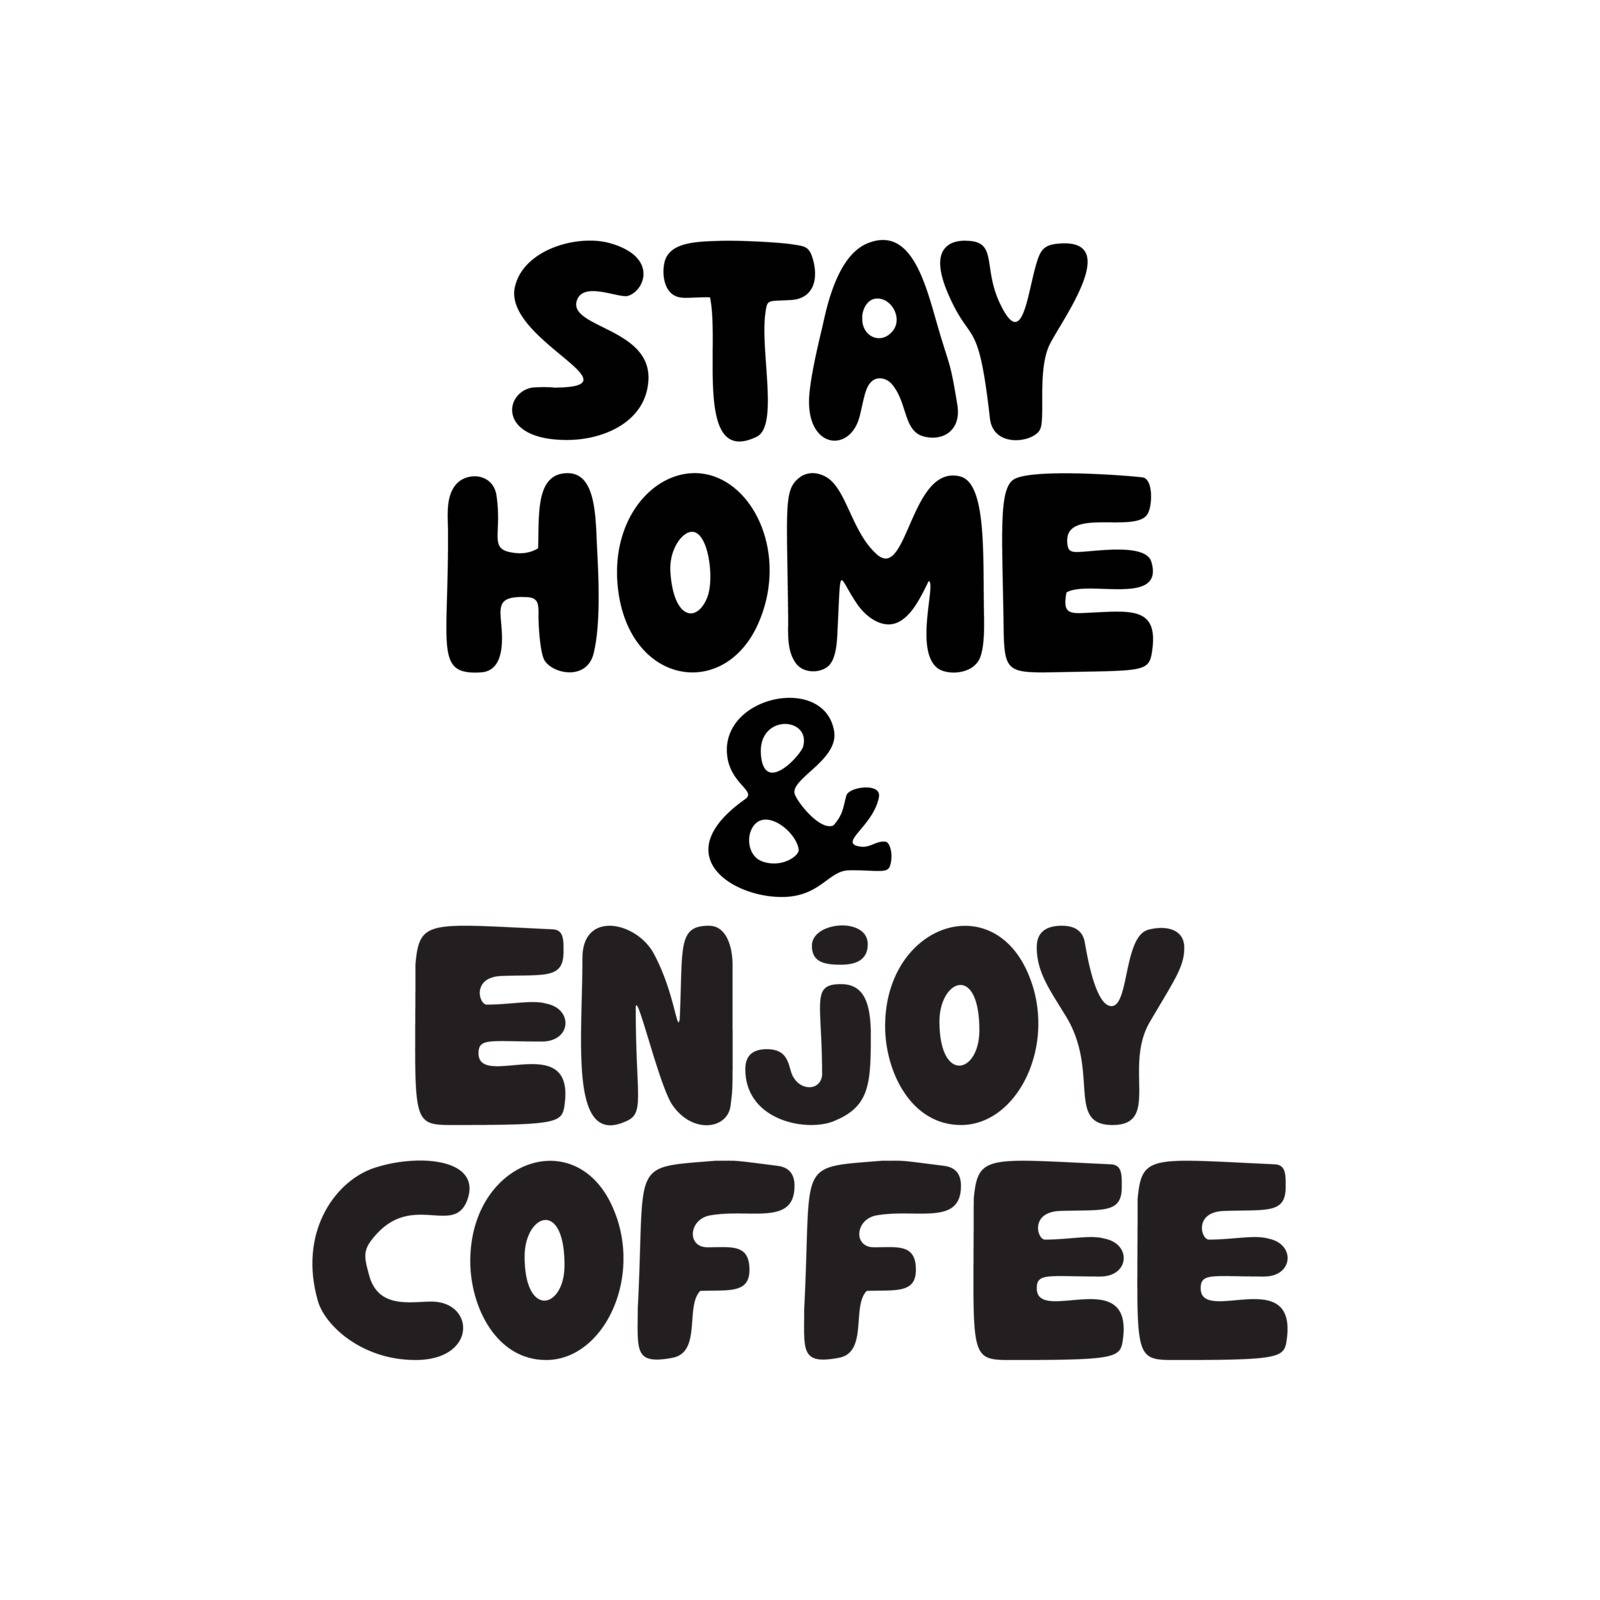 Stay home and enjoy coffee. Cute hand drawn doodle bubble lettering. Isolated on white. Vector stock illustration.